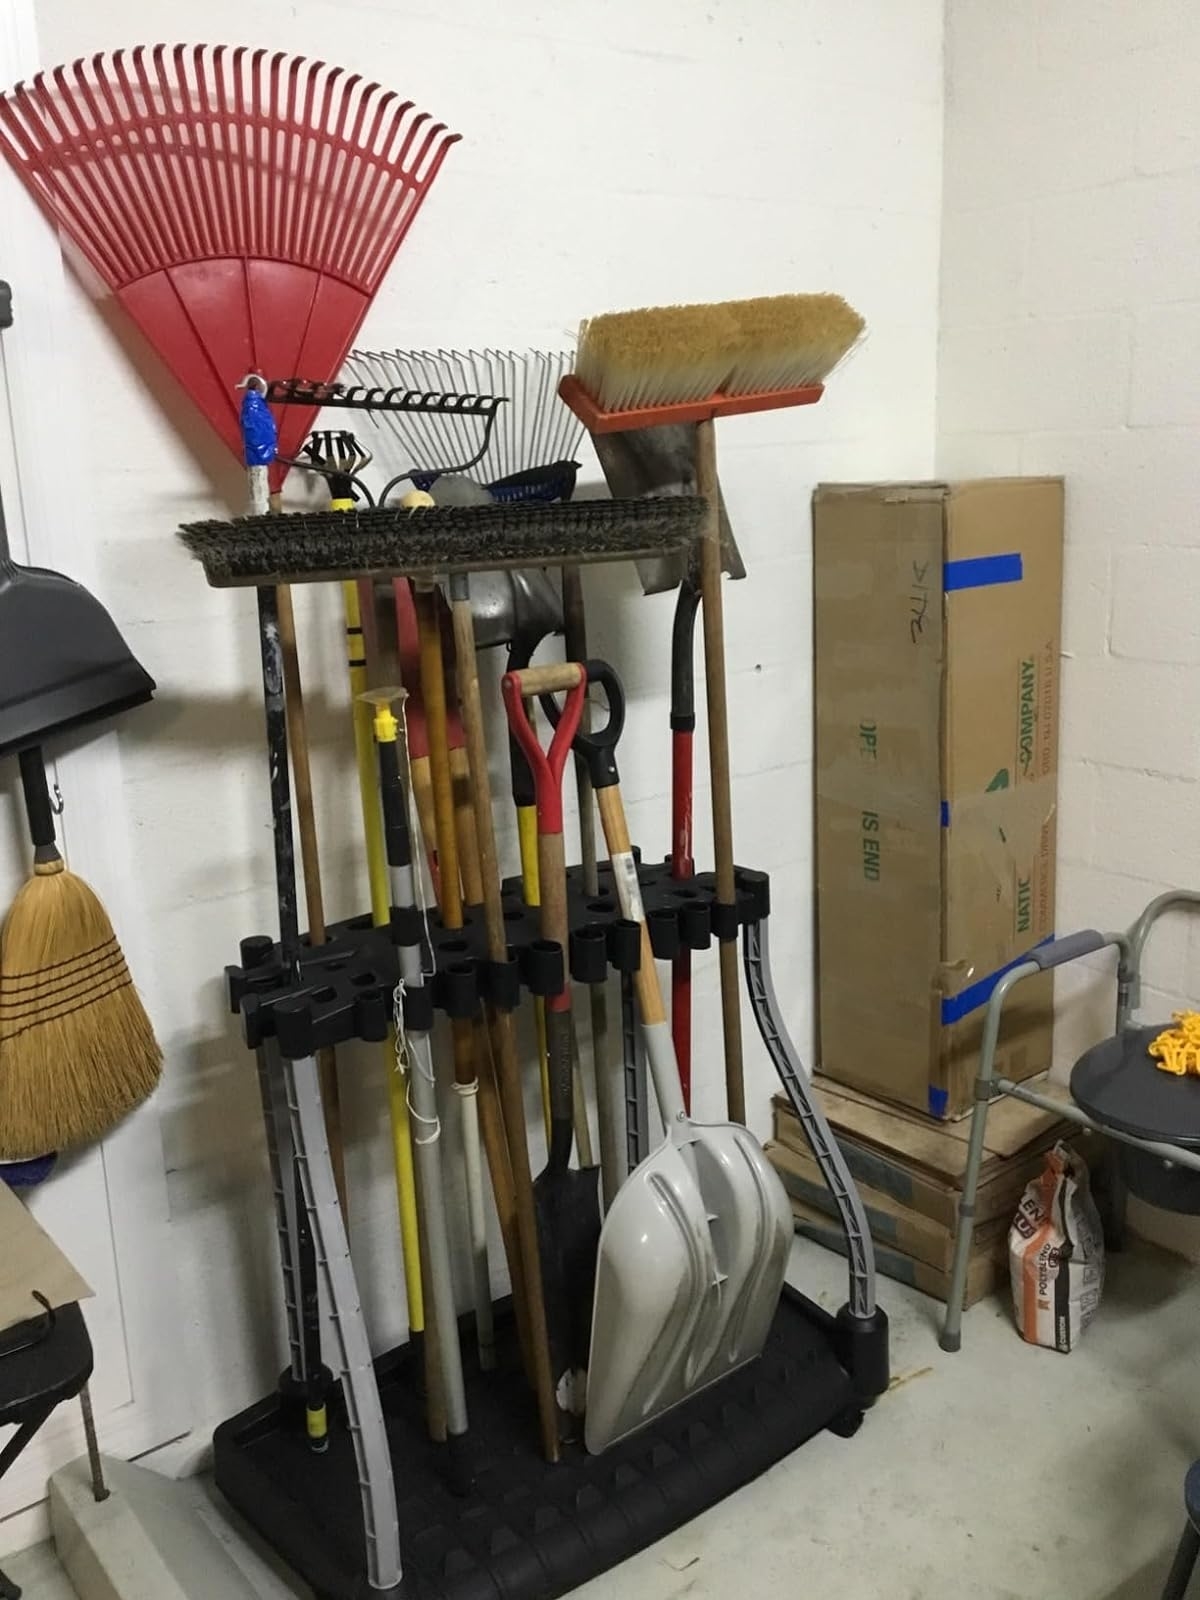 Assorted cleaning tools organized in a corner storage unit in a garage